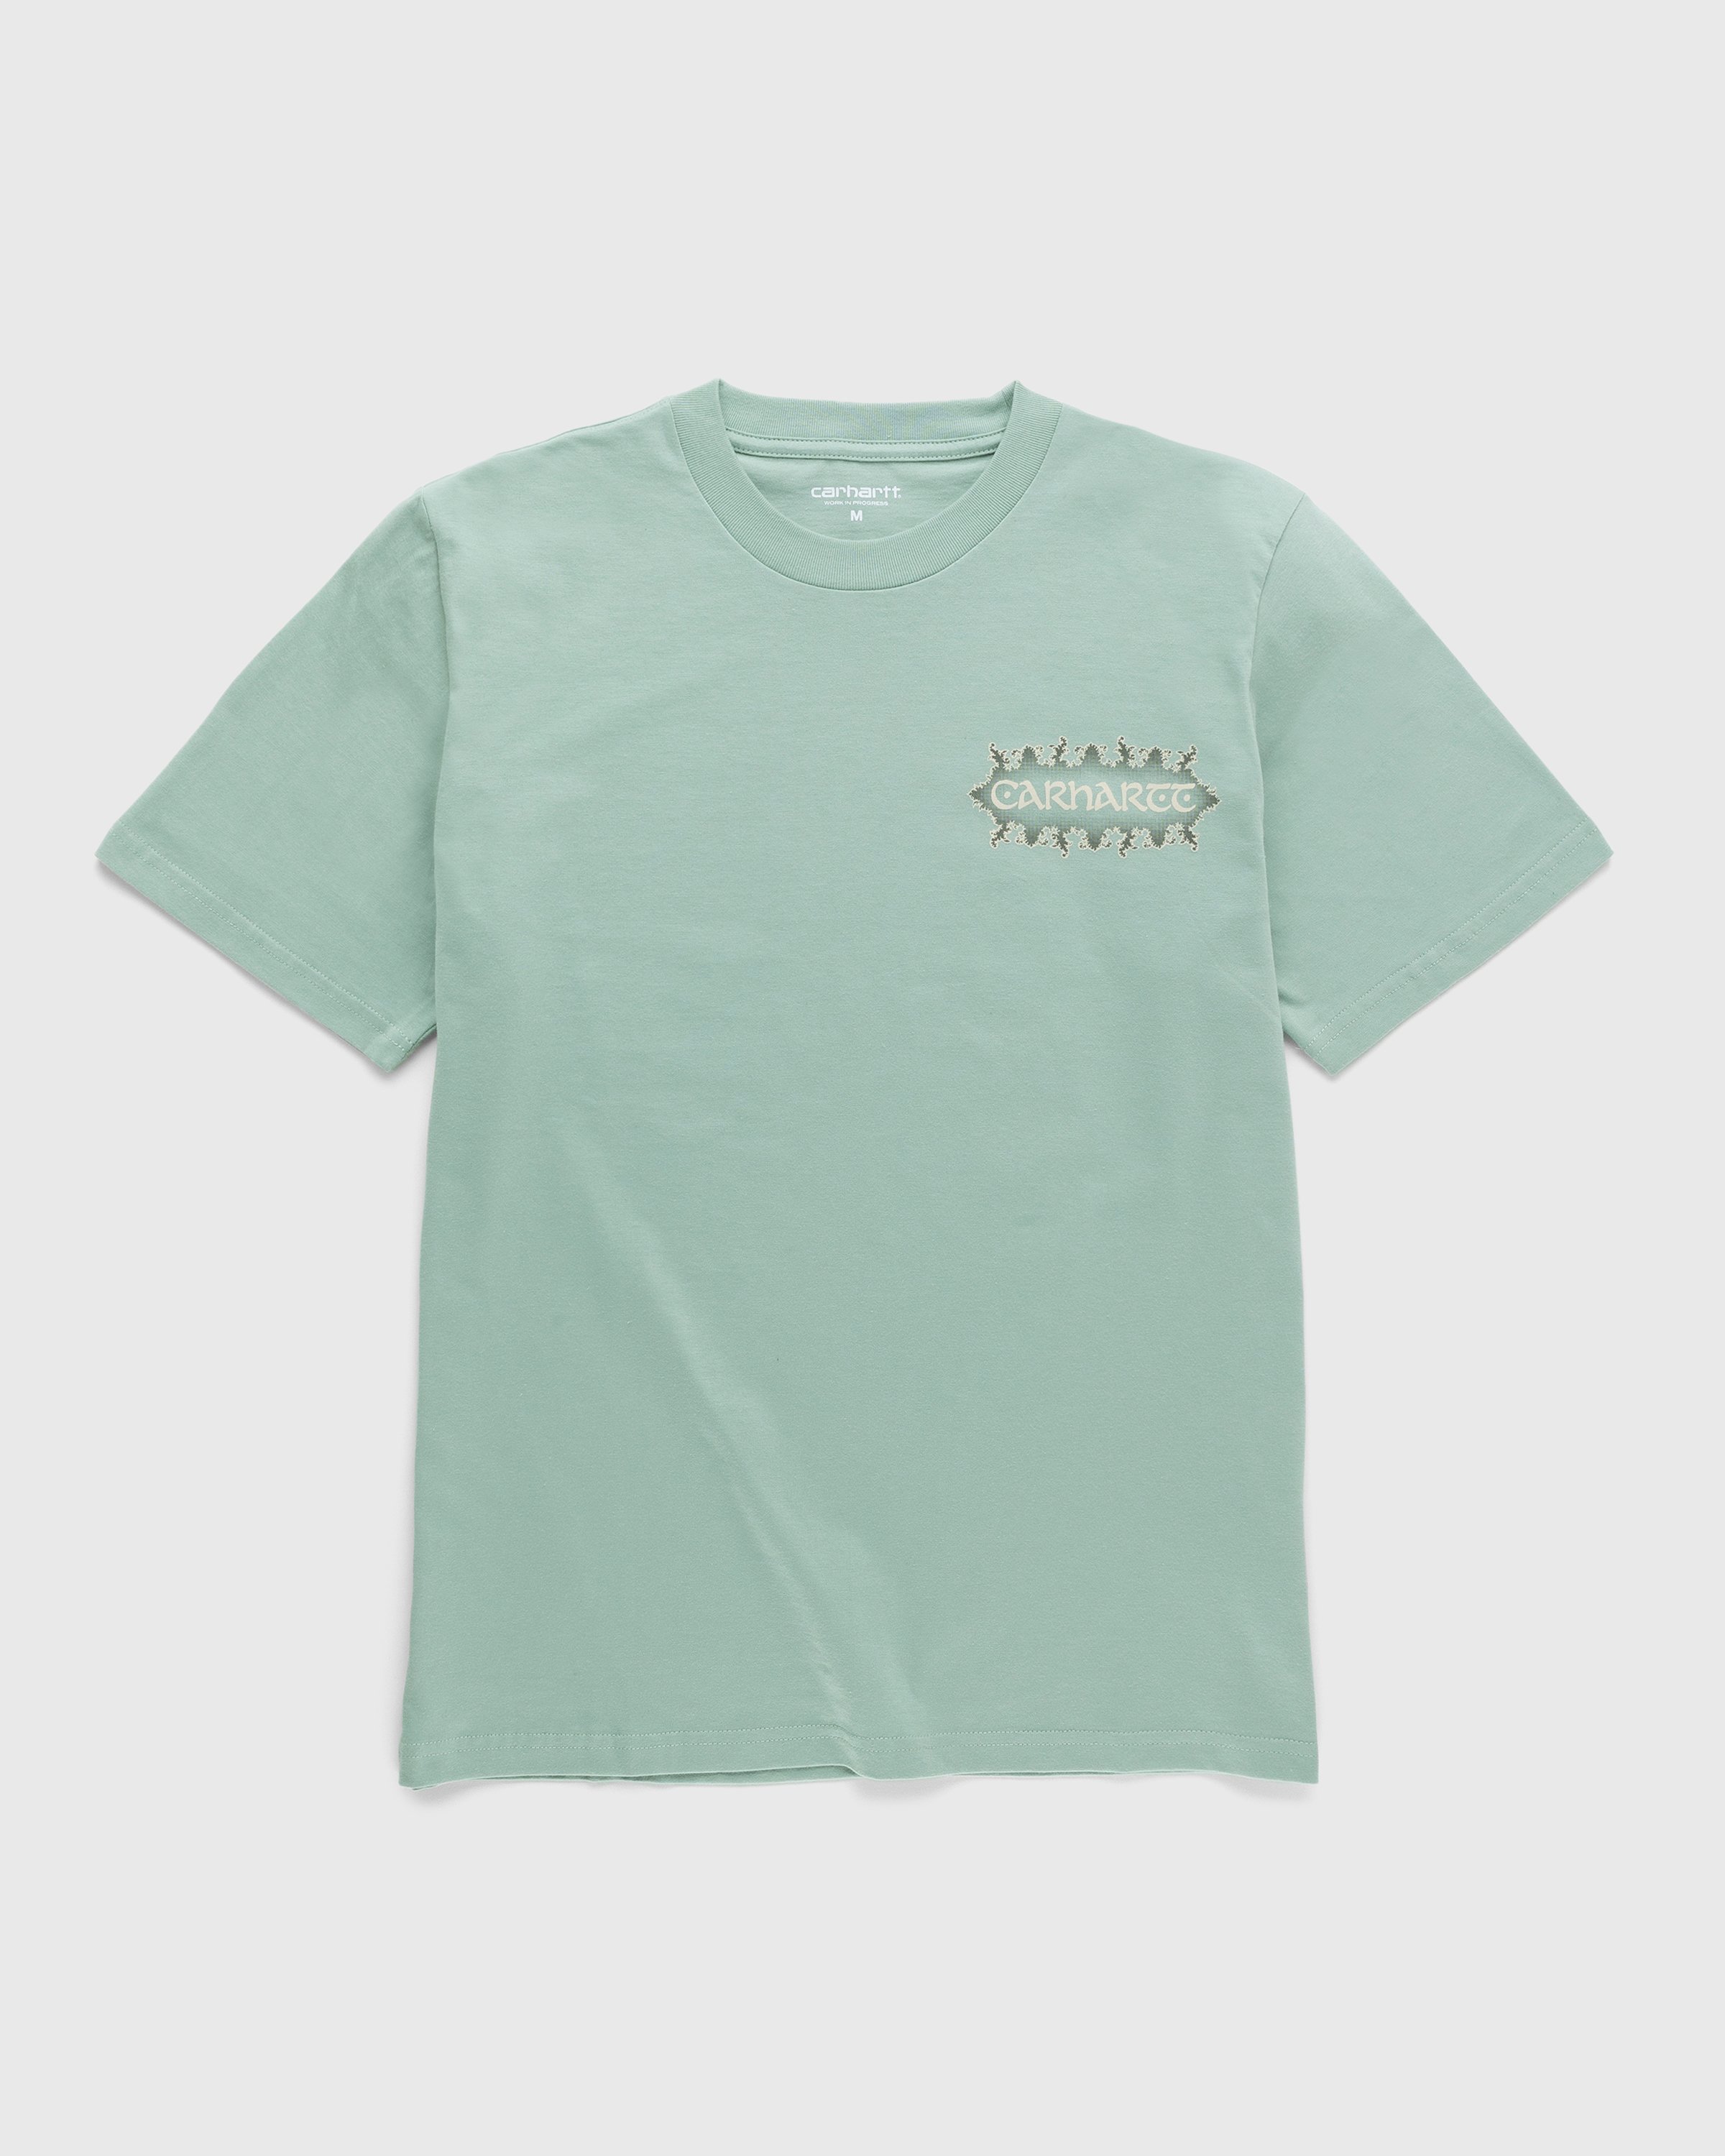 Carhartt WIP - Spaces T-Shirt Misty Sage - Clothing - Green - Image 2